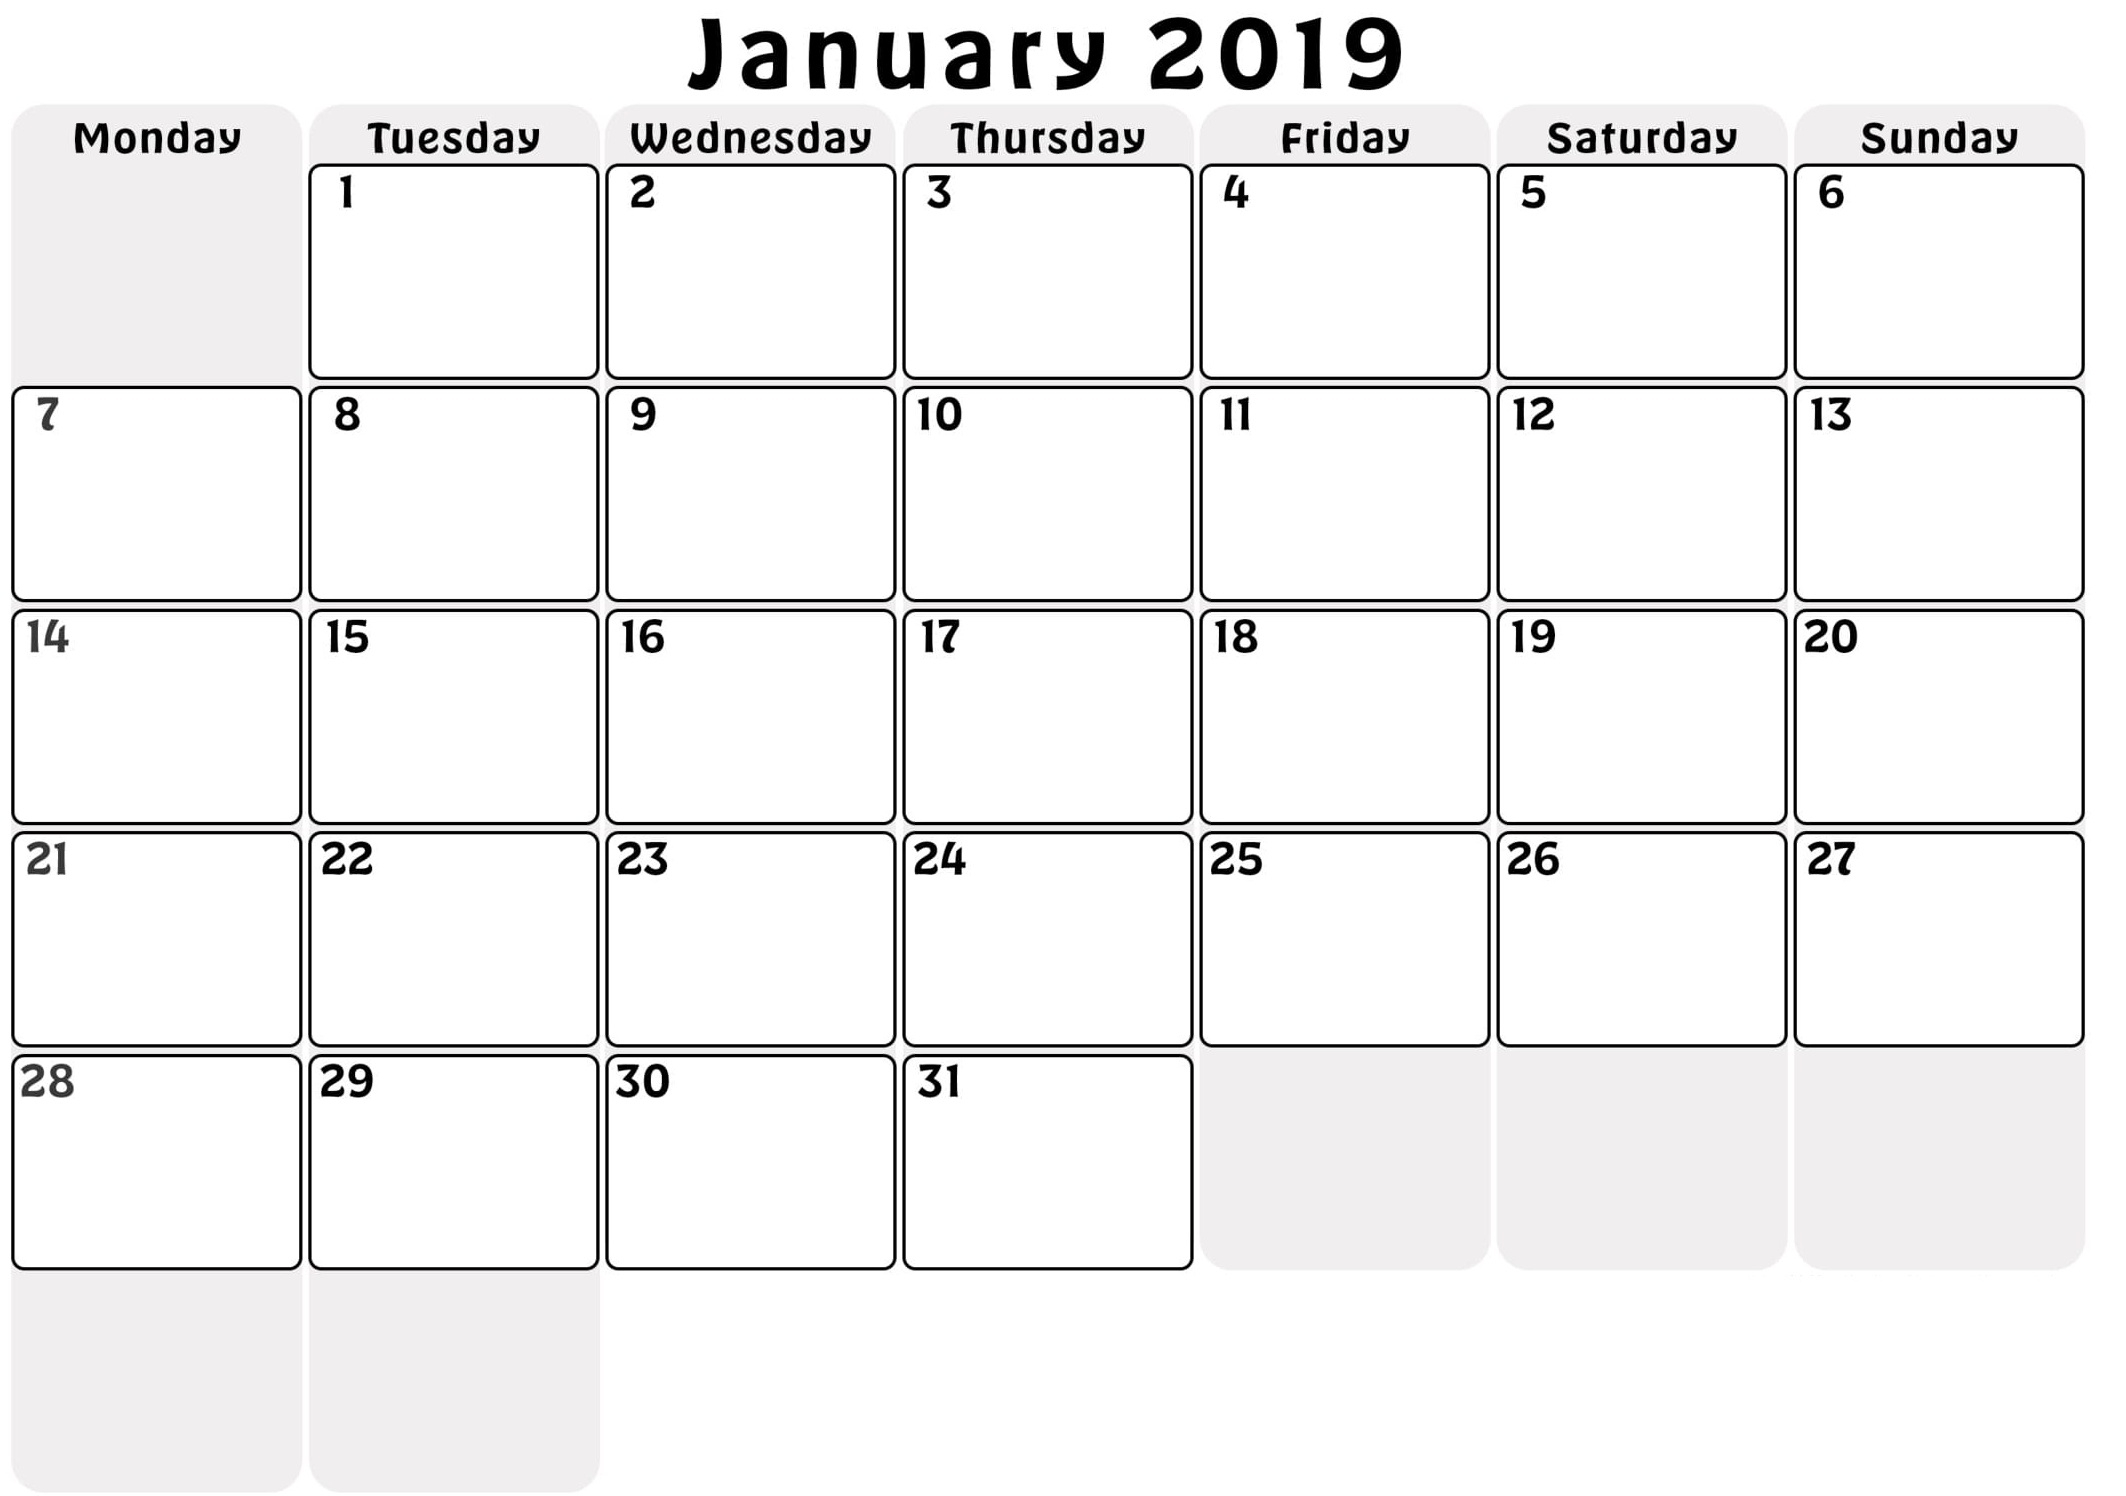 January 2019 Calendar Monthly Printable - Free March 2019 Calendar throughout A3 Blank Calendar Monthly Template